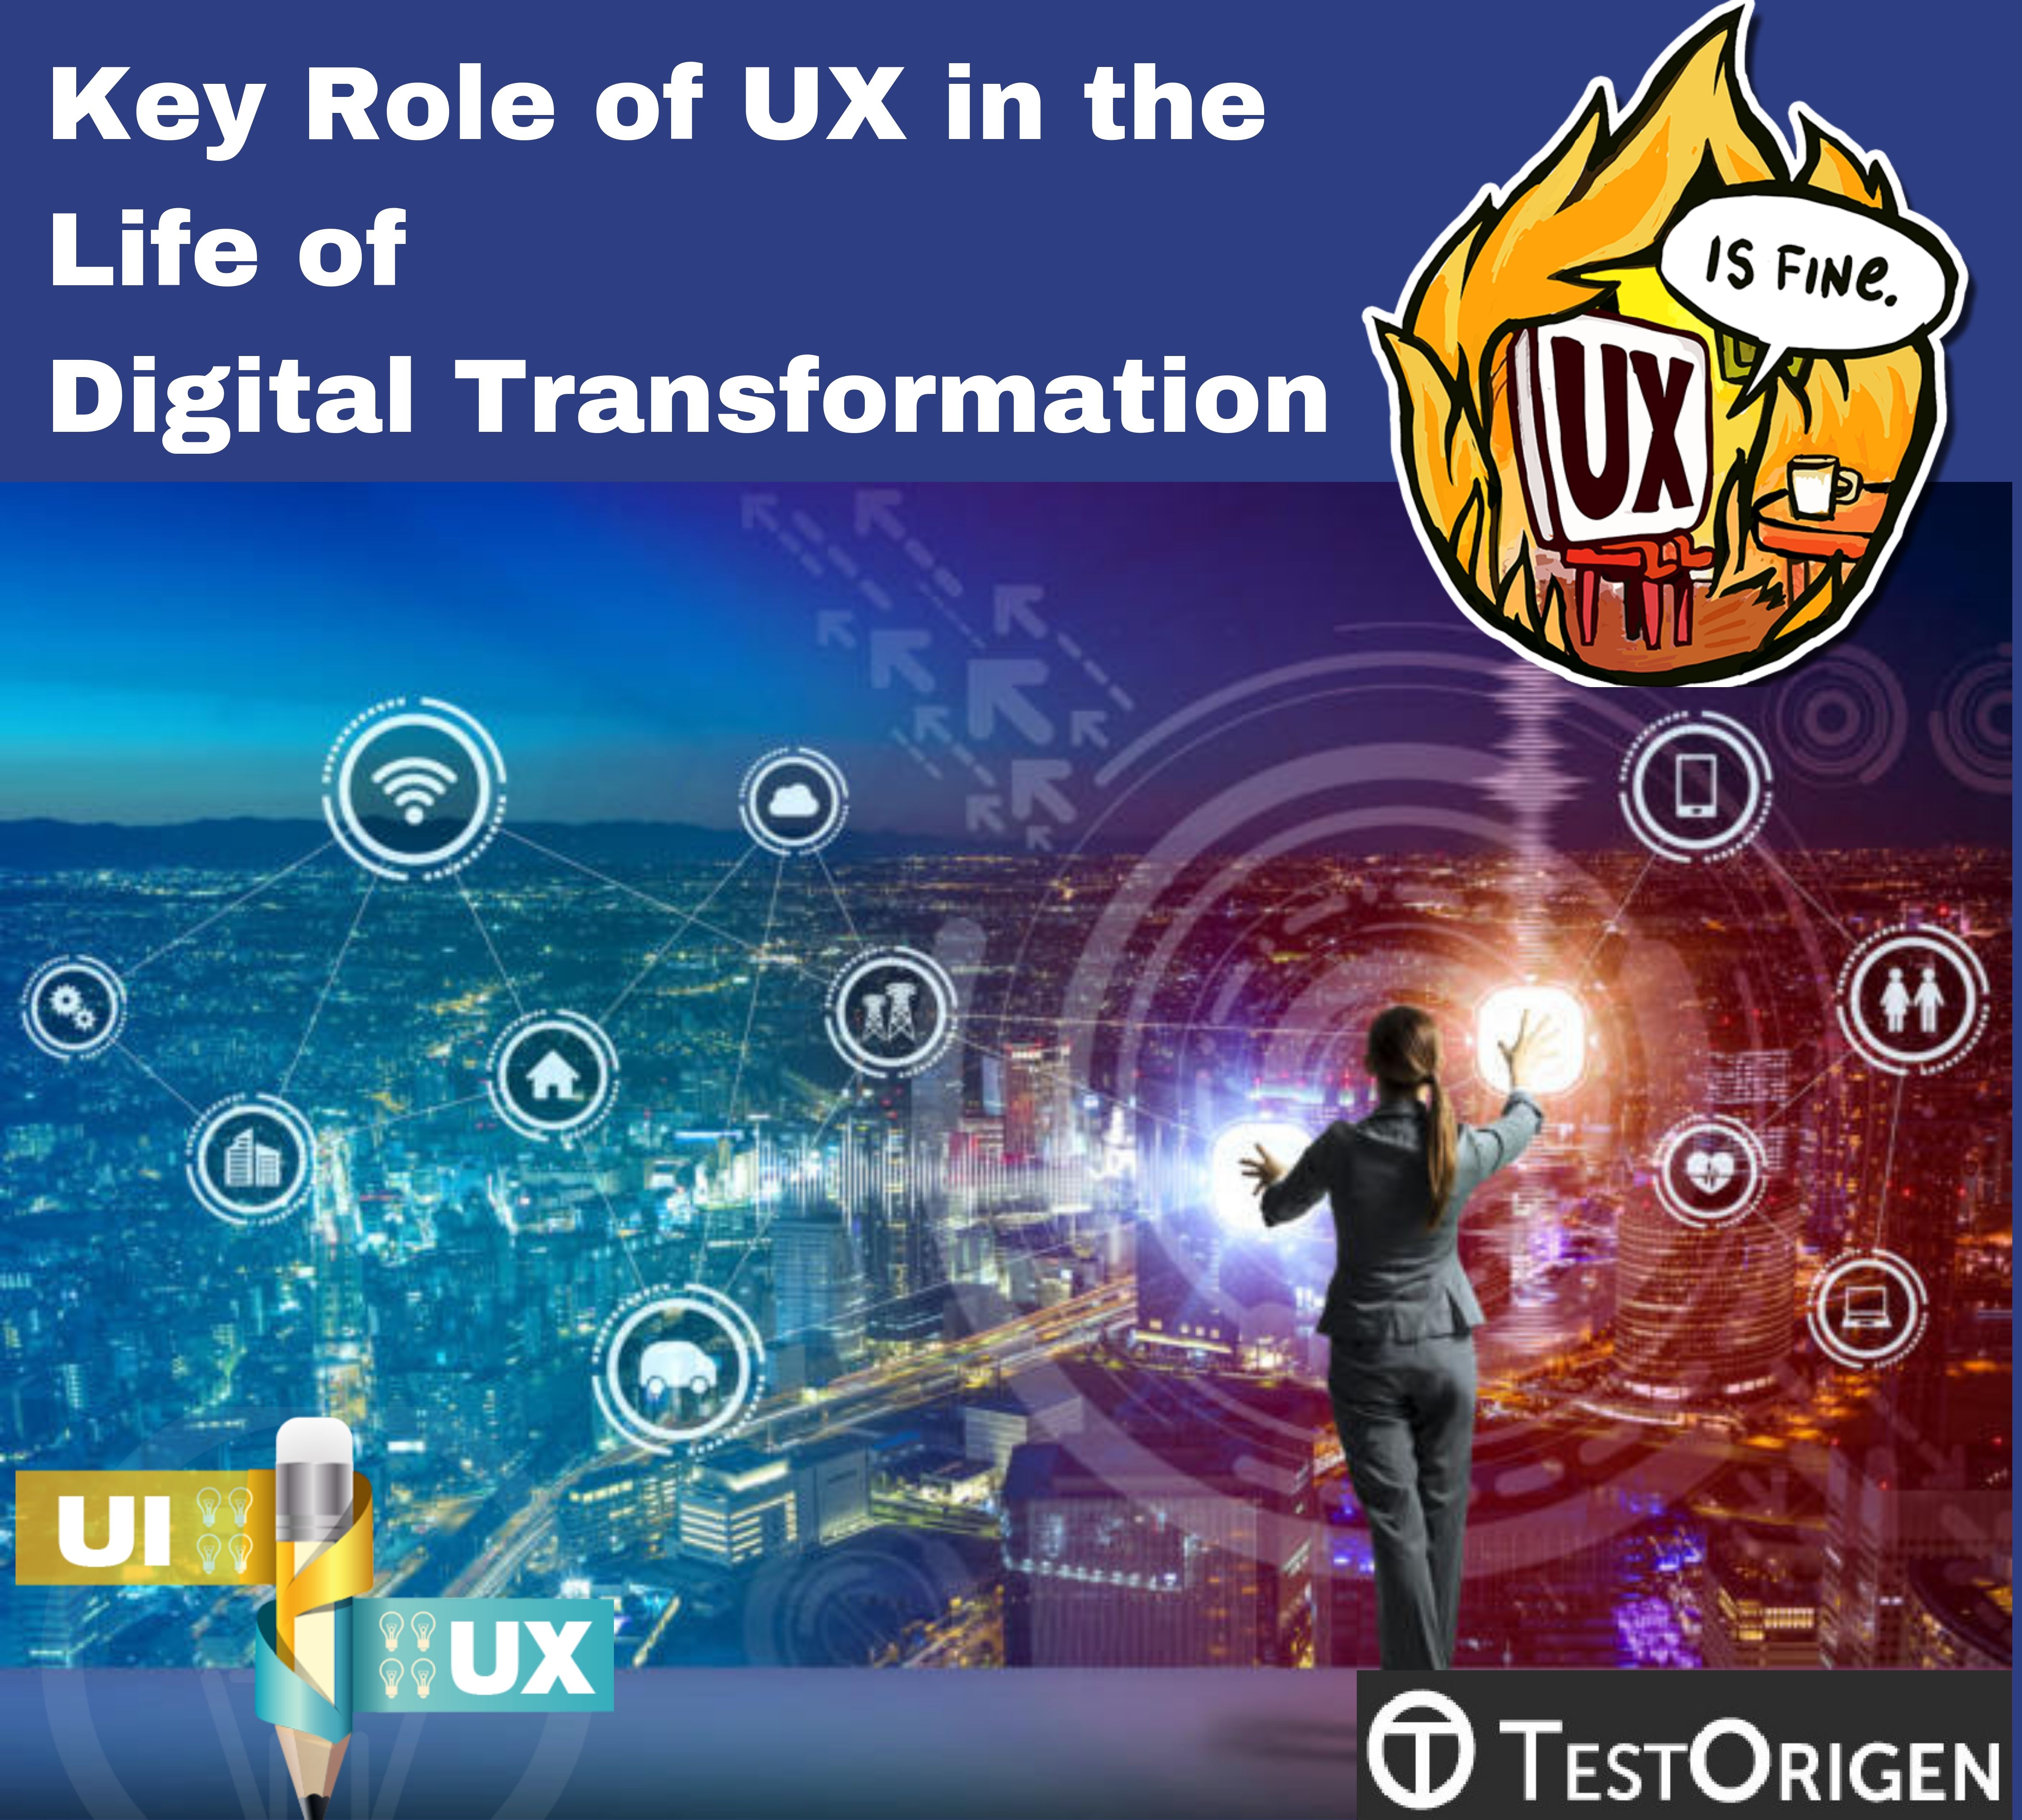 Key Role of UX in the Life of Digital Transformation